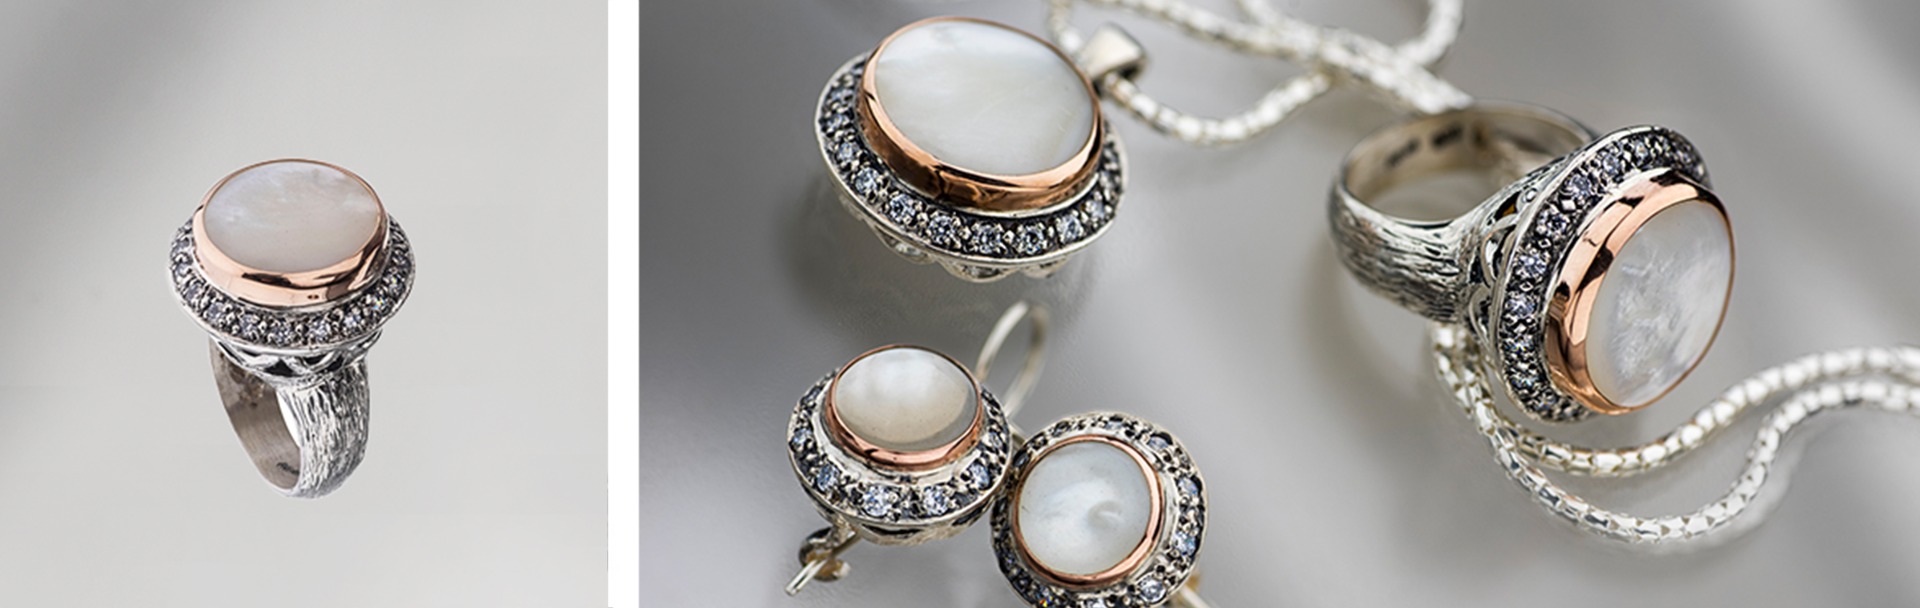 Nacre Collection | 925 Sterling Silver and 9K Gold Jewelry with Zircons and Mother of Pearl